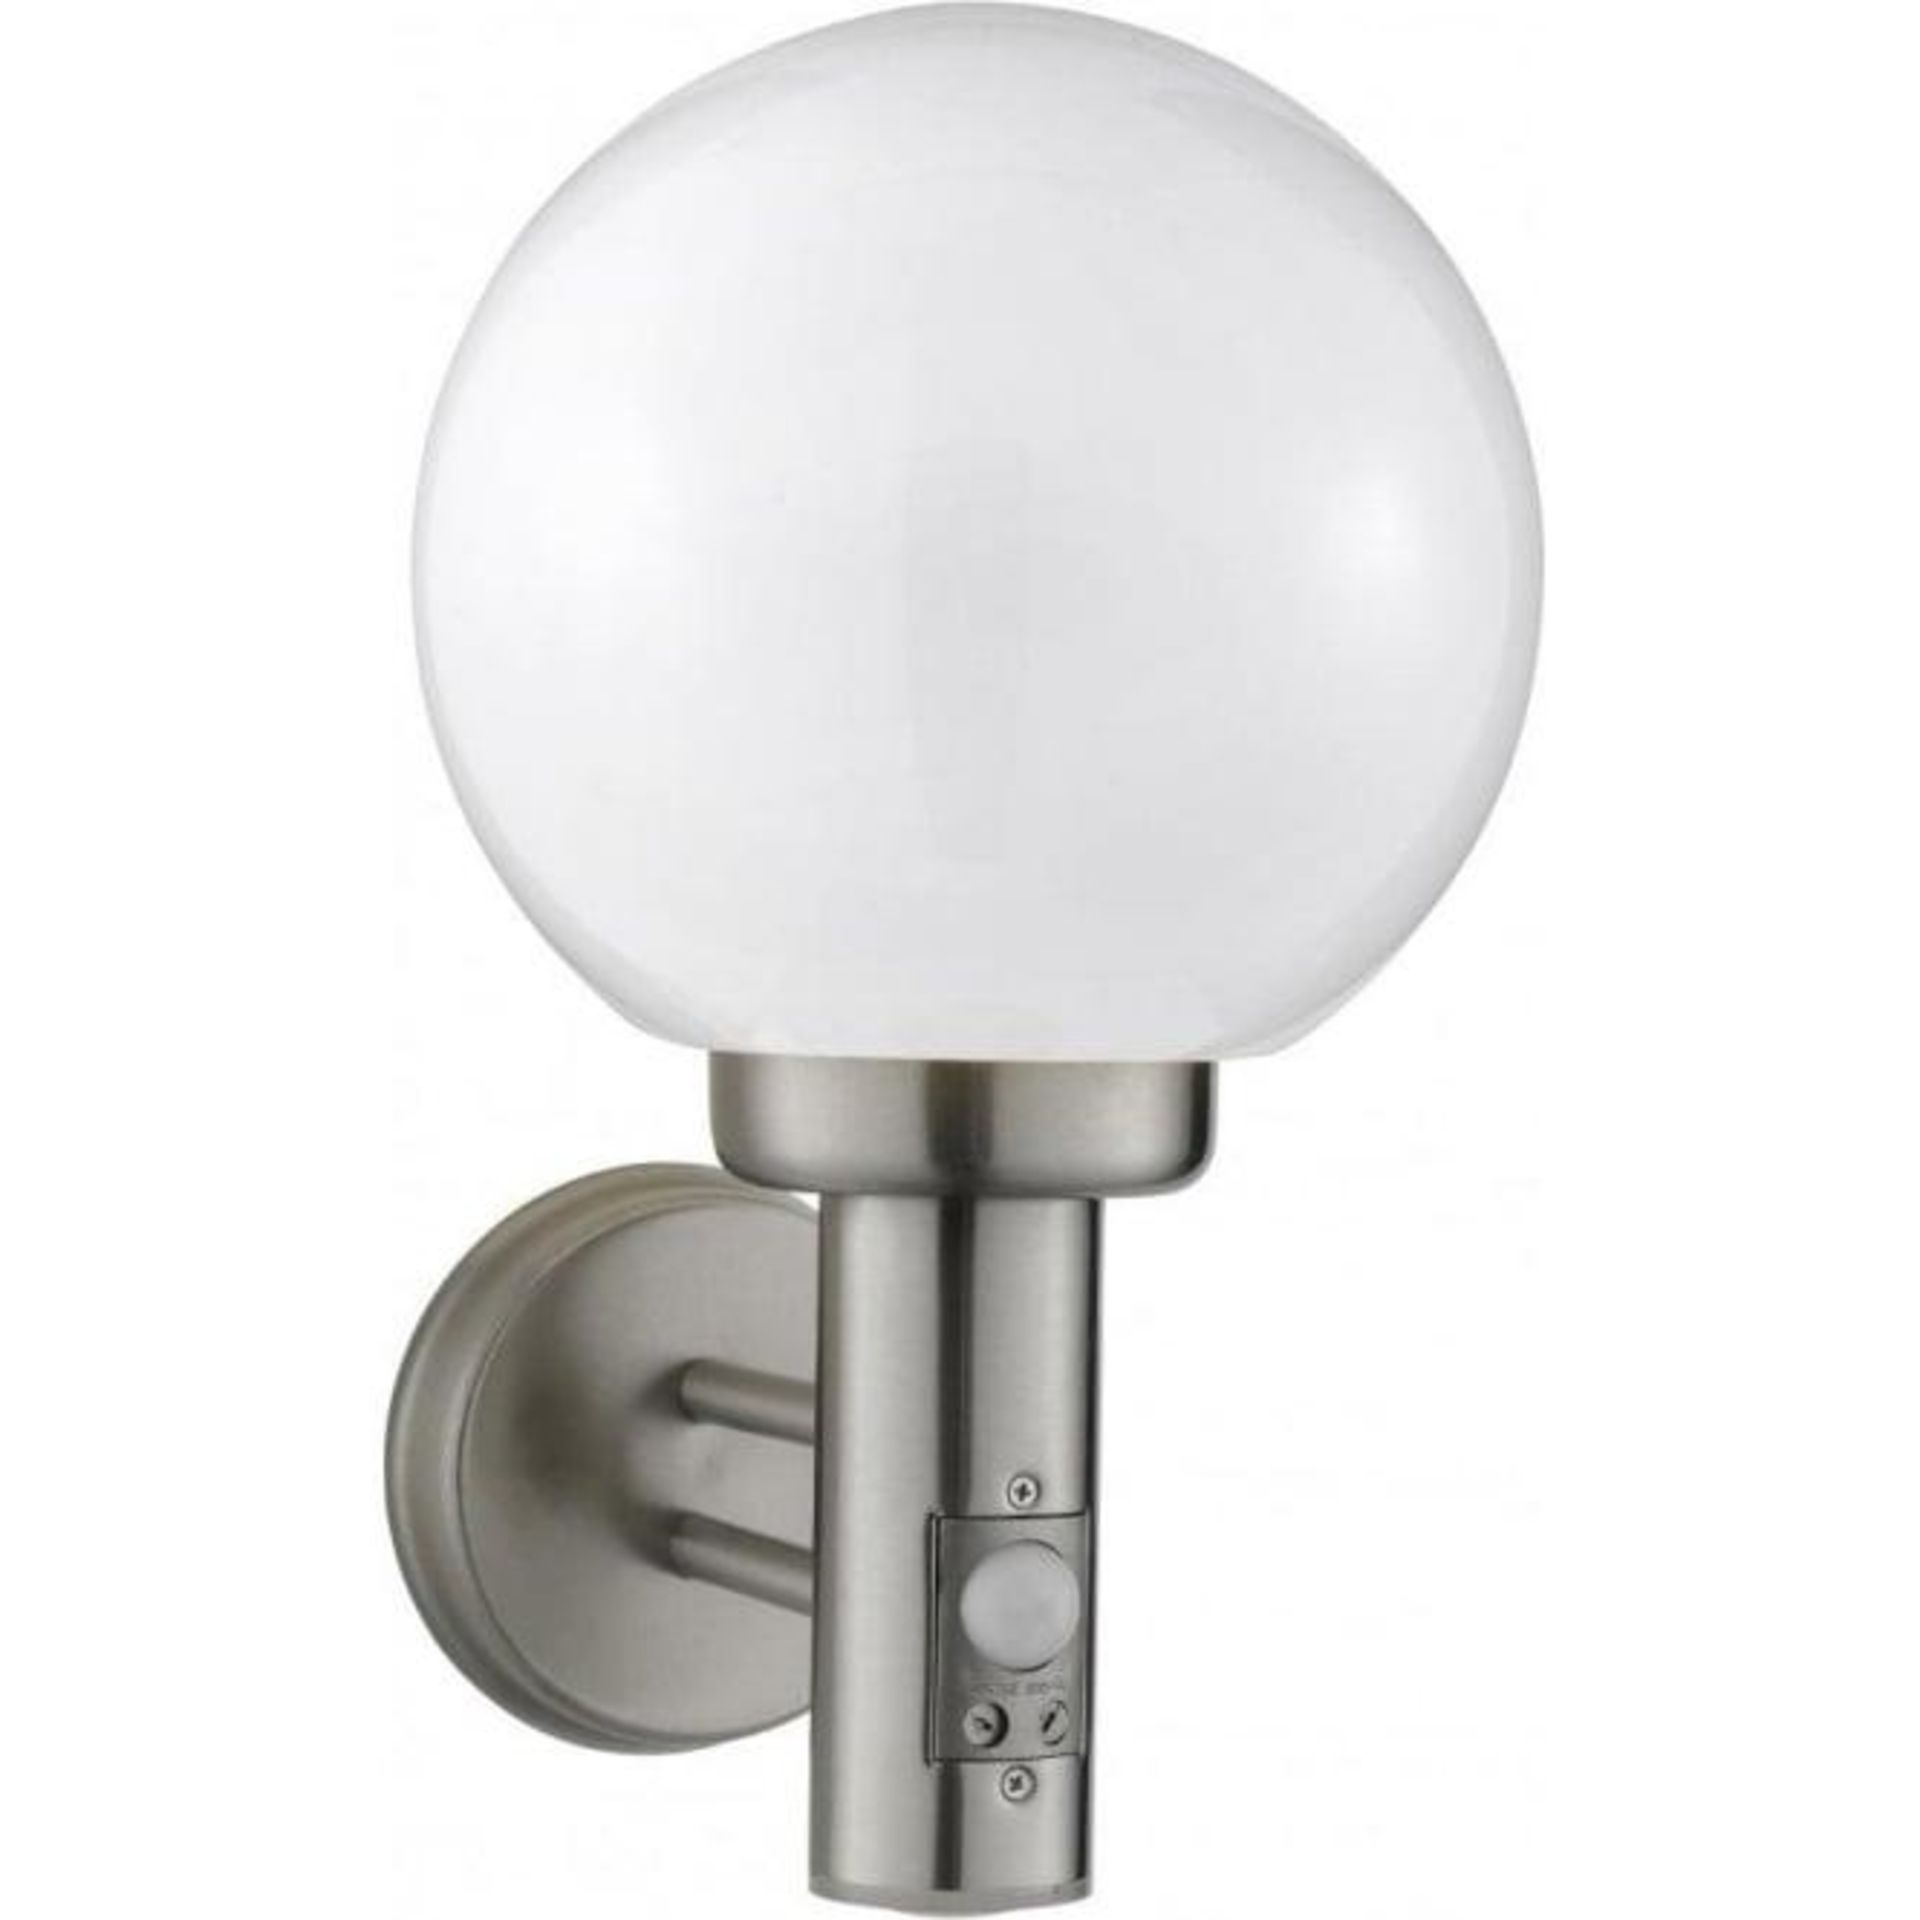 4 x Globe Outdoor Wall Light With PIR Motion Sensor - Stainless Steel With Polycarbonate Shade - IP4 - Image 4 of 6